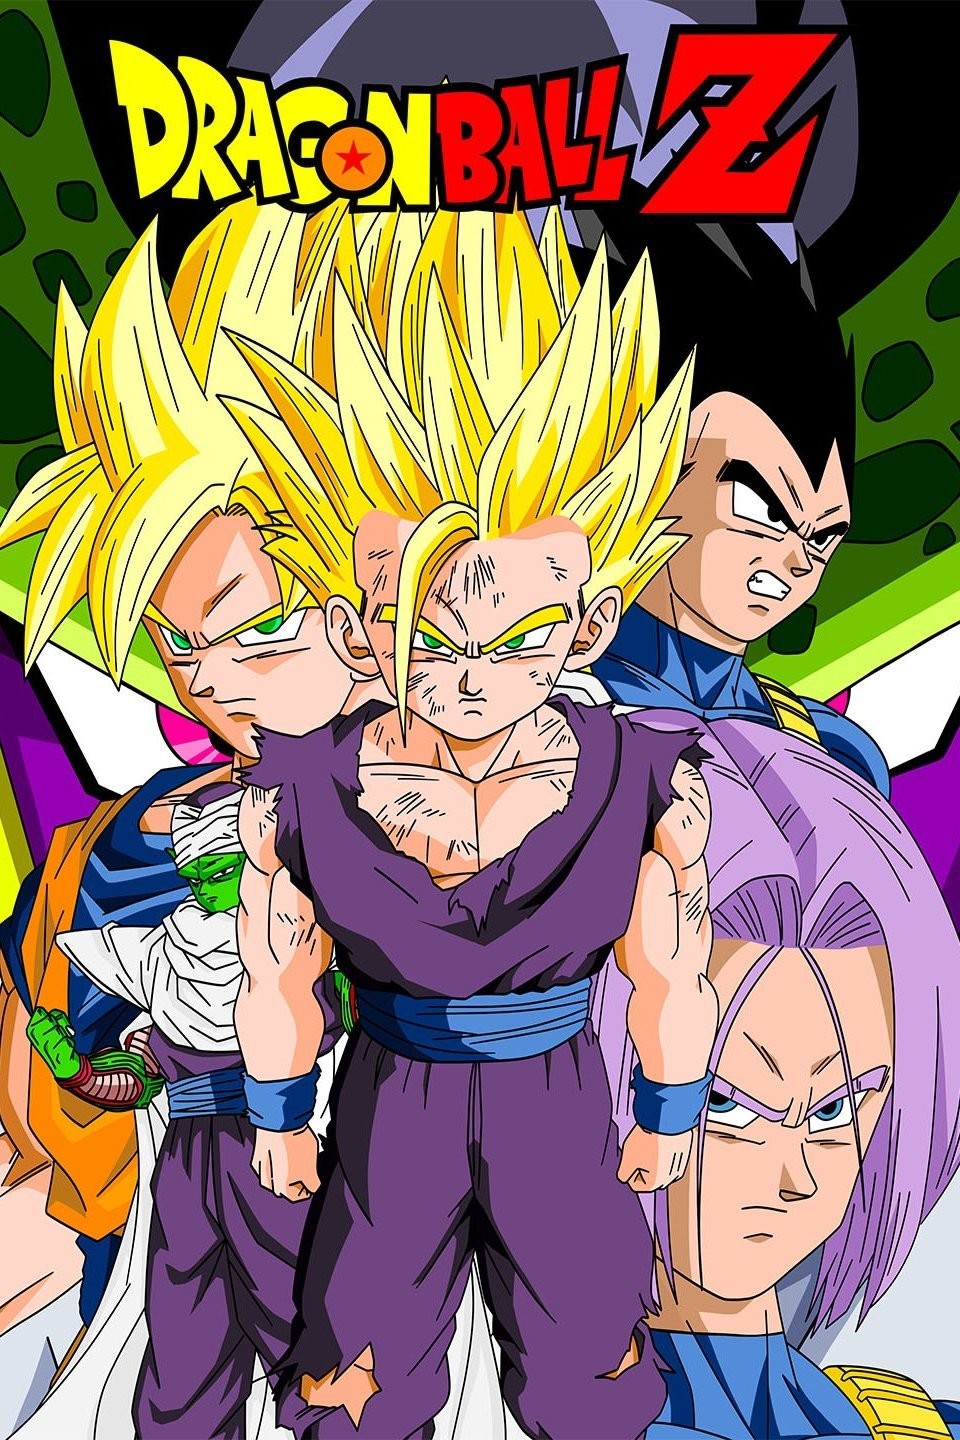 Why Fans Don't Count Dragon Ball in the 'Big Three' Anime